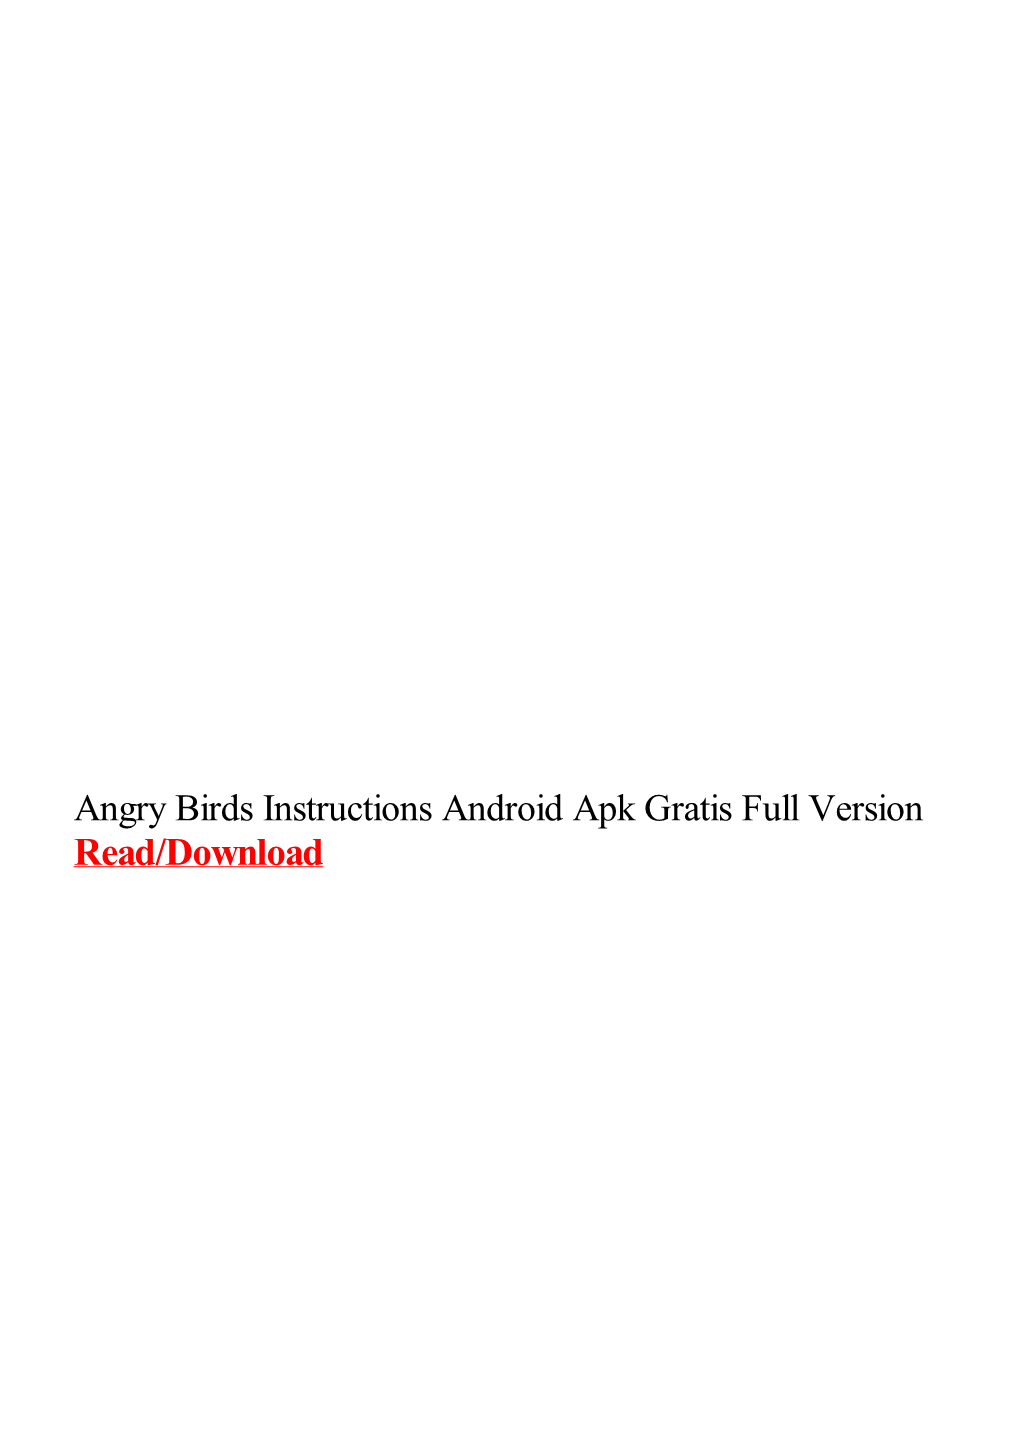 Angry Birds Instructions Android Apk Gratis Full Version.Pdf